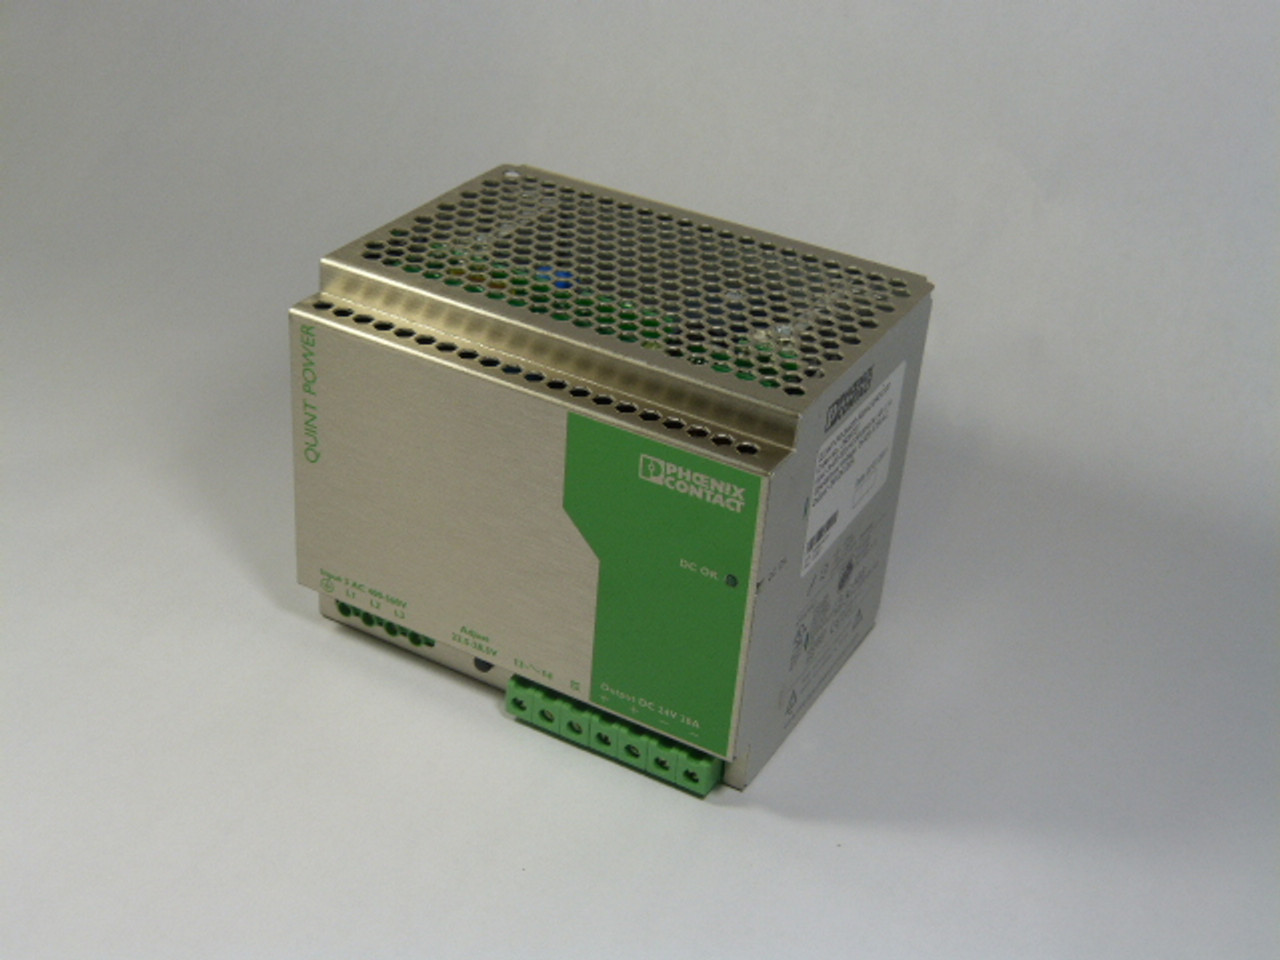 Phoenix Contact 2938727 Power Supply 3-Phase 20A 24VDC USED